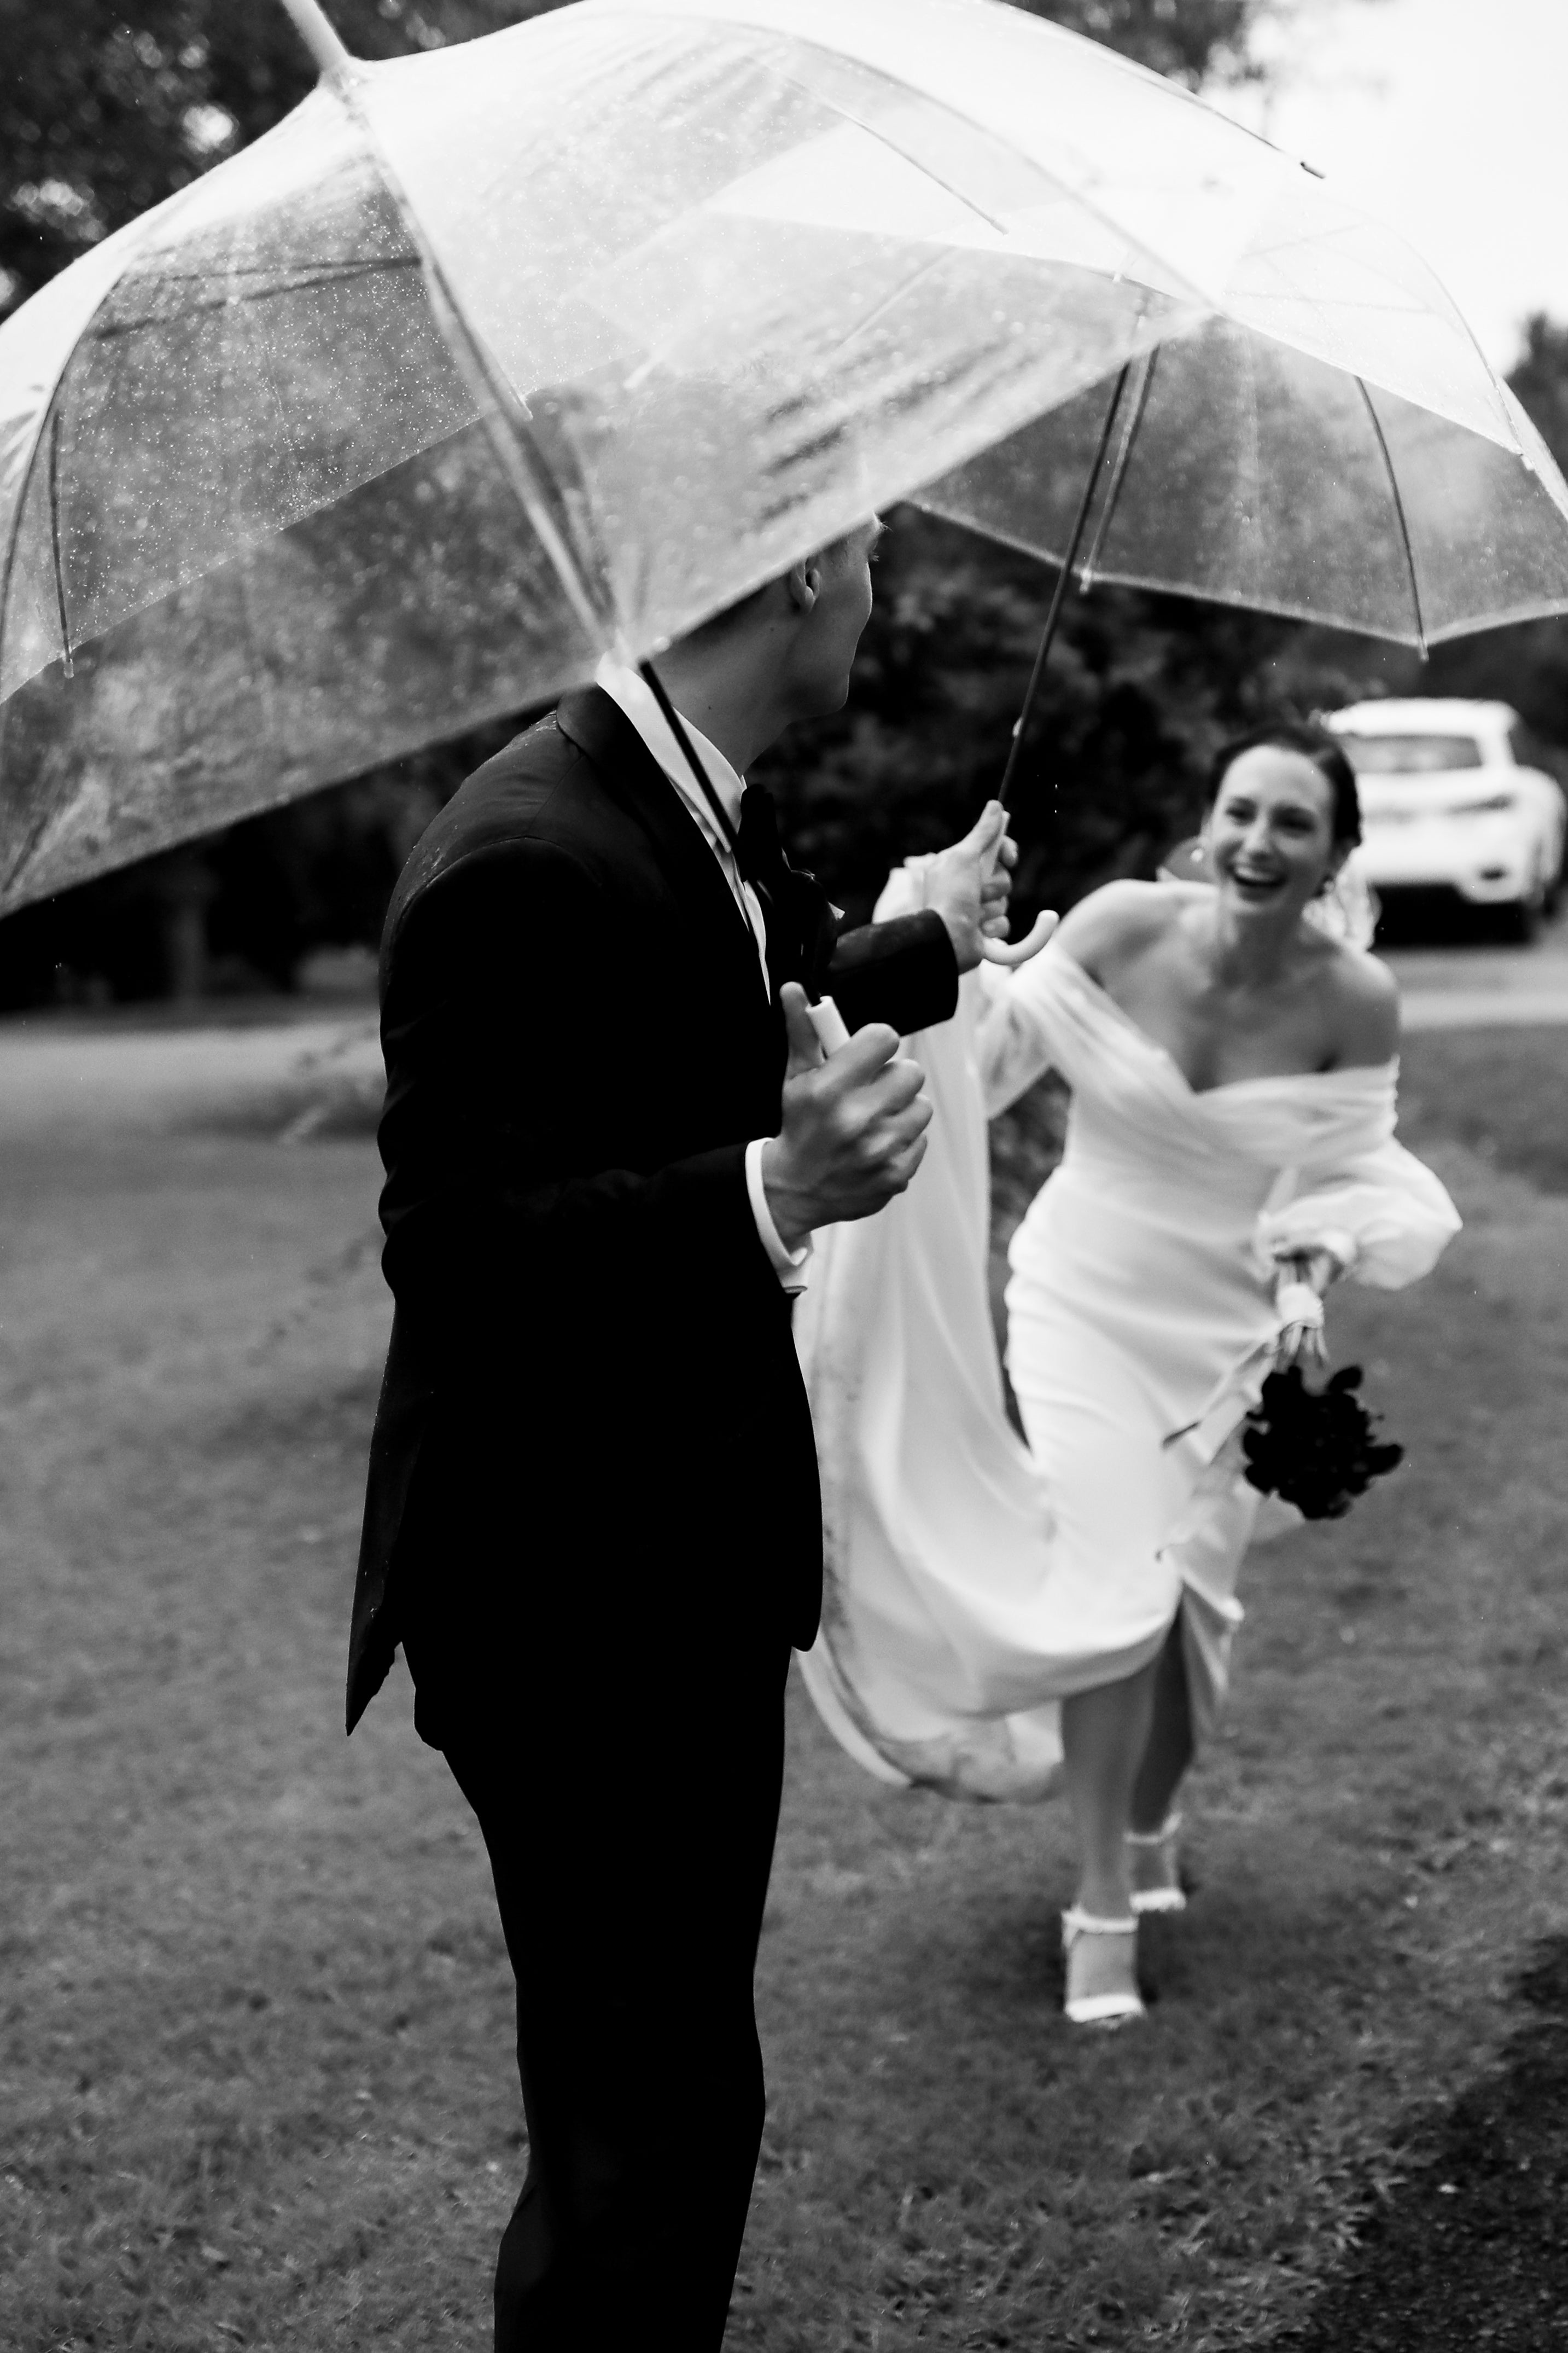 Clear Umbrellas for Hire | For Love & Living Gold Coast Weddings & Events